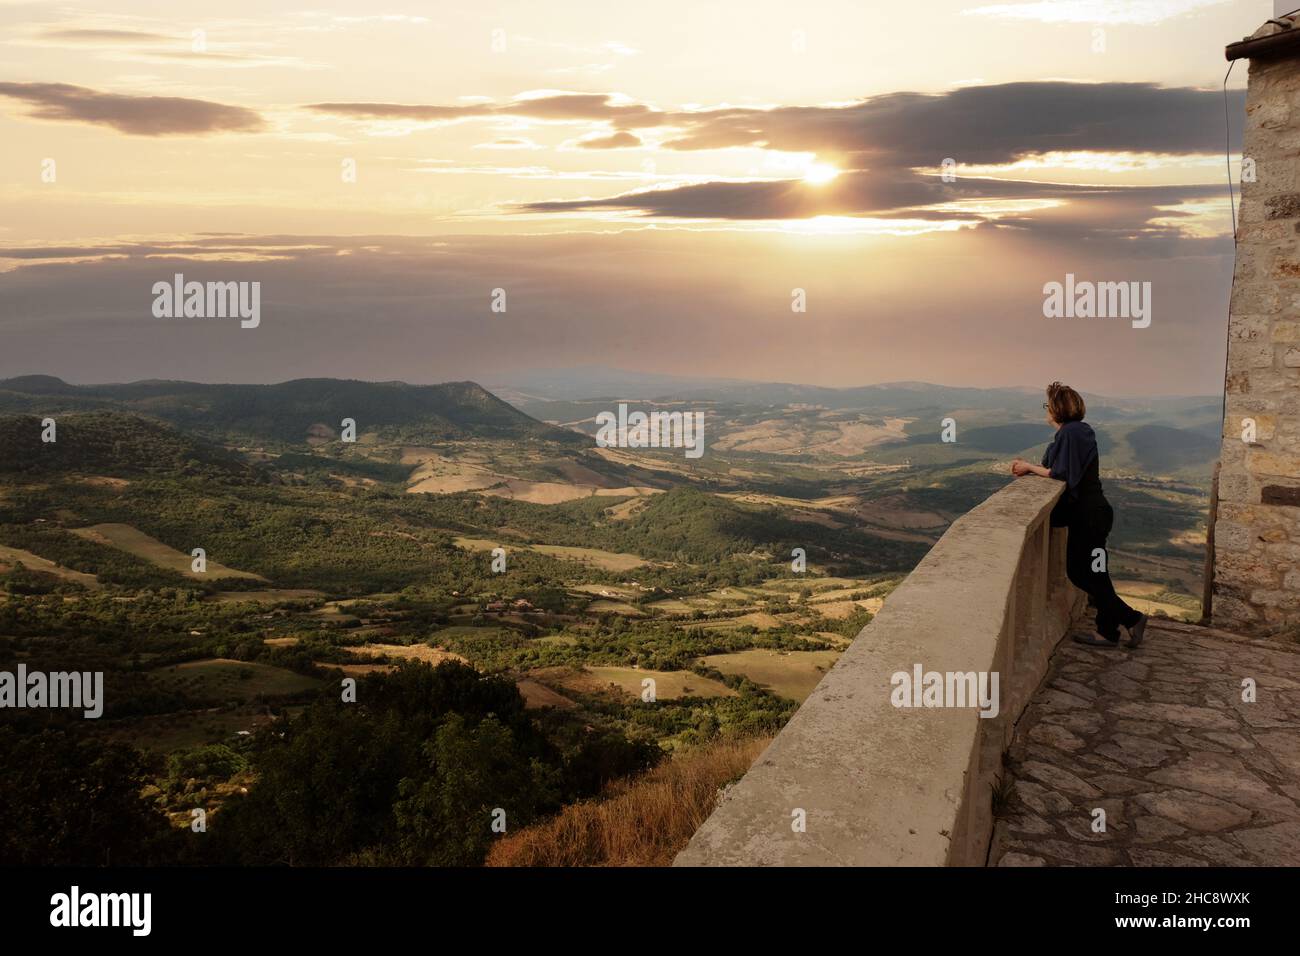 A woman looking into the distance at a scenic landscape during the early hours of the morning Stock Photo